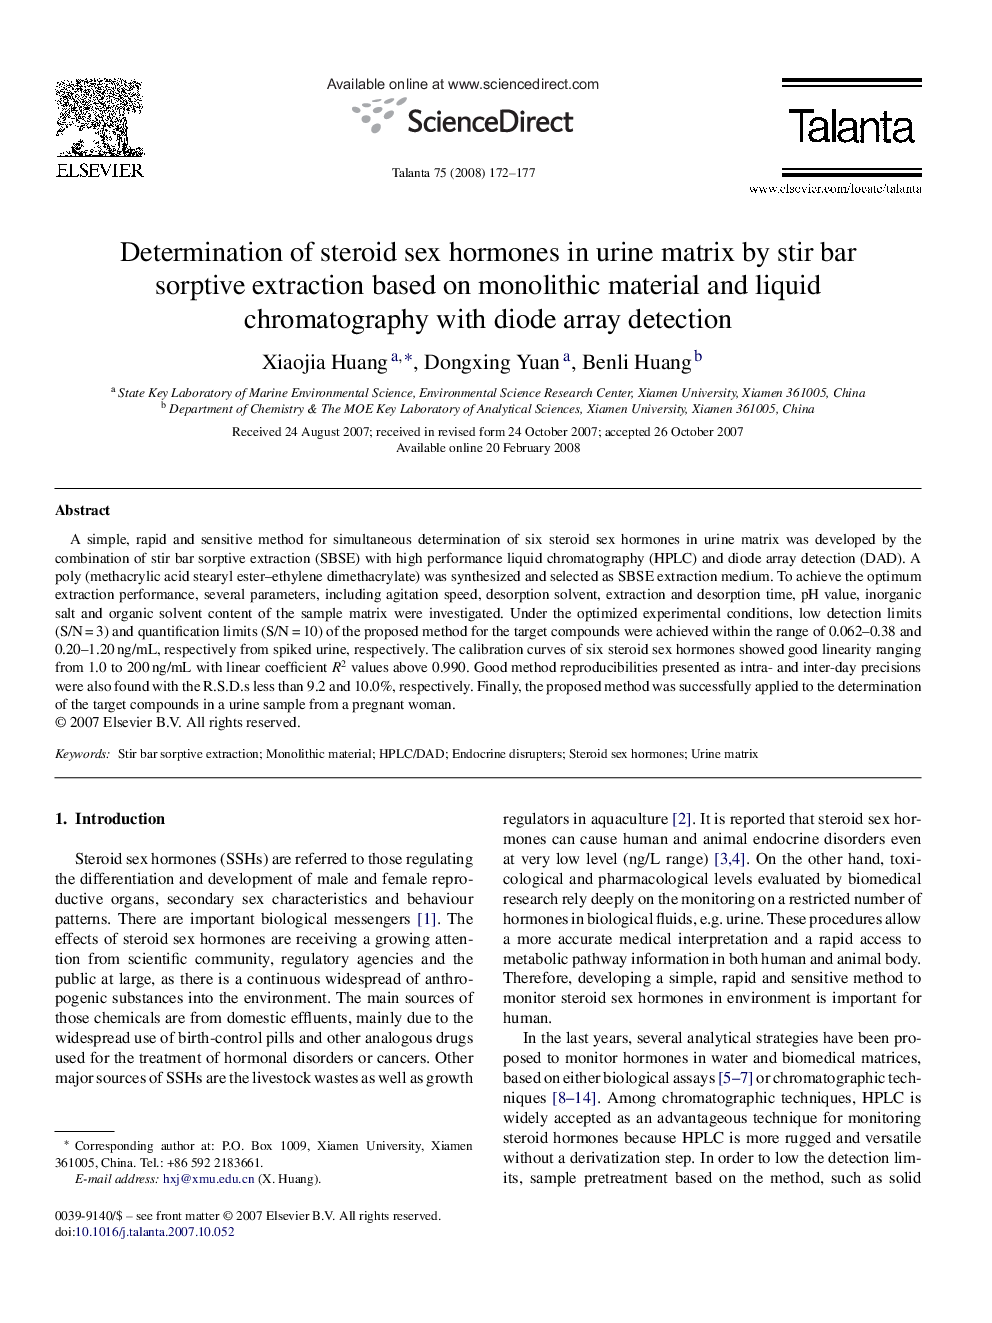 Determination of steroid sex hormones in urine matrix by stir bar sorptive extraction based on monolithic material and liquid chromatography with diode array detection